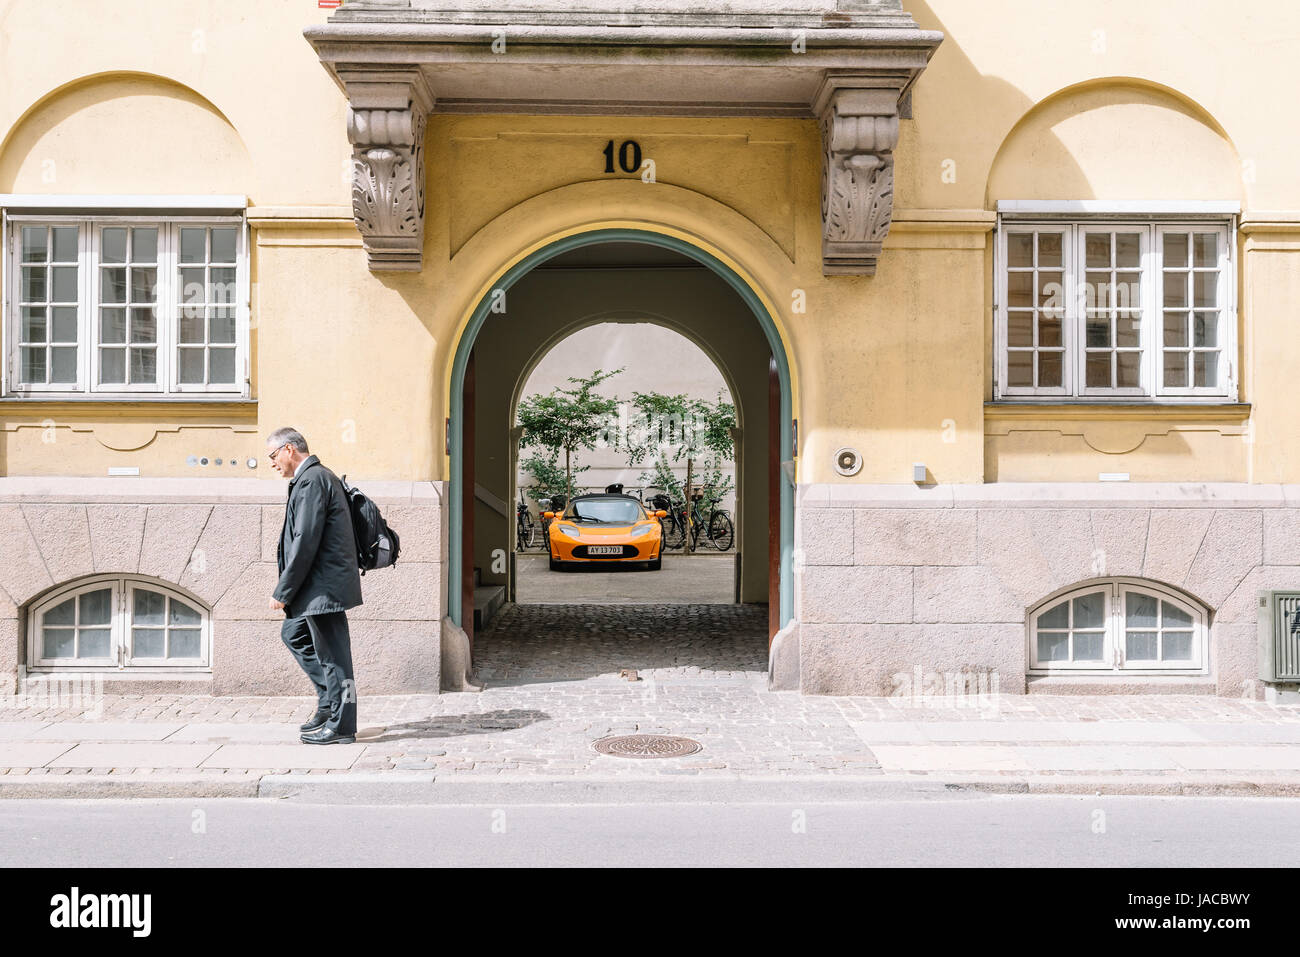 Copenhagen, Denmark - August 10, 2016. Unidentified middle aged man walking at the door entrance to a house with a luxury sport car parked in the pati Stock Photo